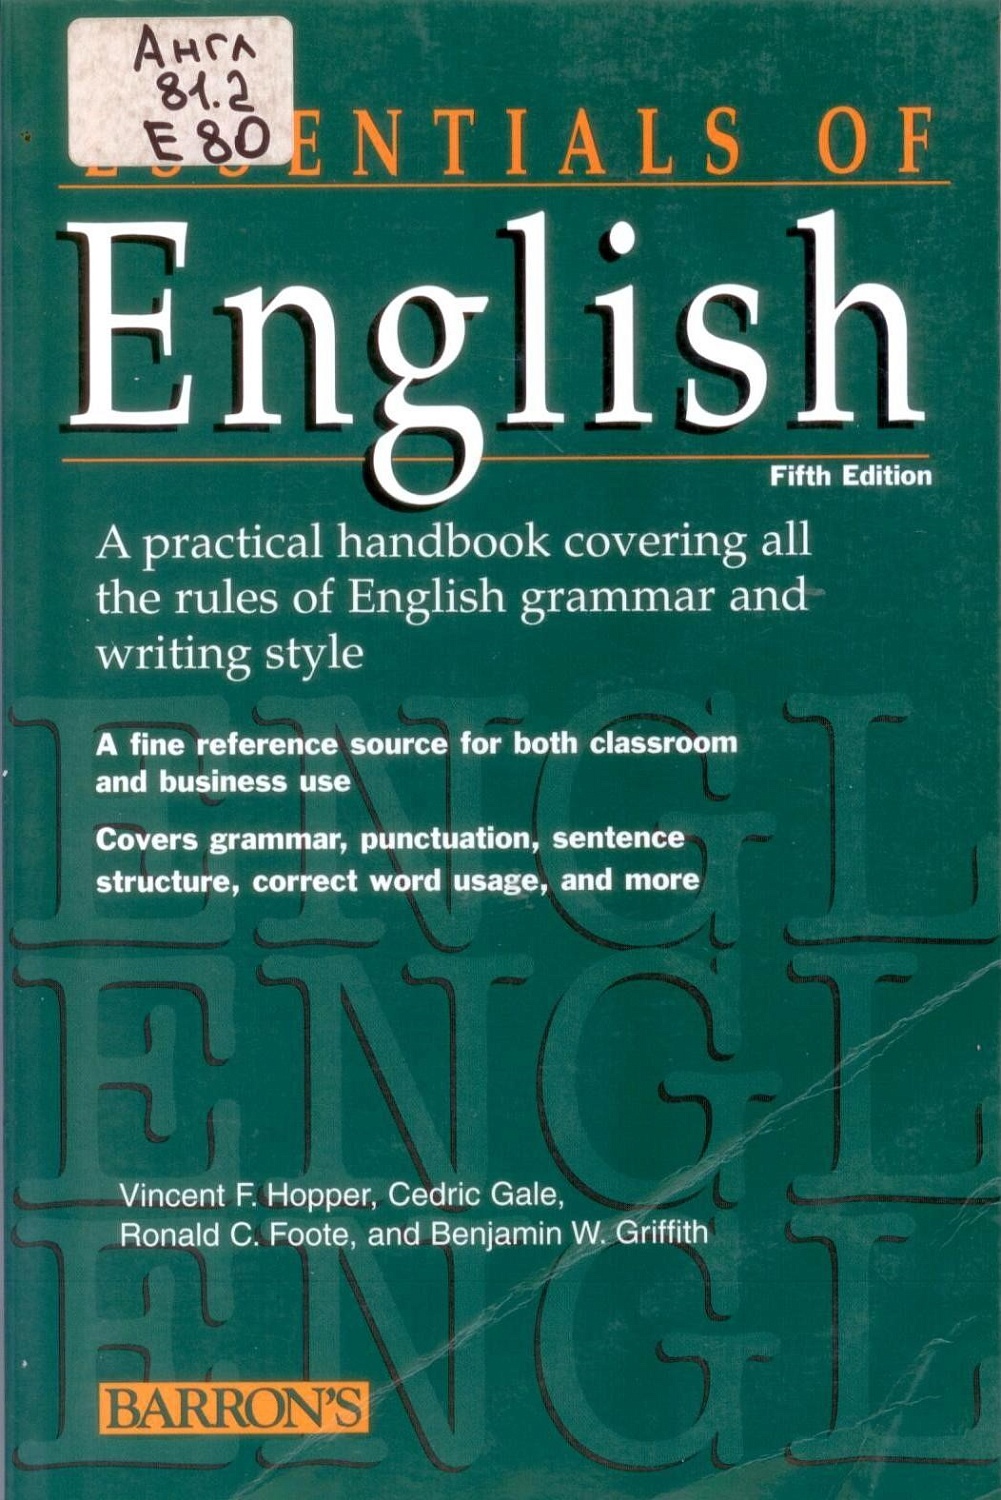 Англ 81.2 E 80 Essentials of English|: [A practical handbook covering all the rules of English grammar and writing style] / Vincent F. Hopper [ et al.]–New York: Barron’s, 2000. – 240 p.